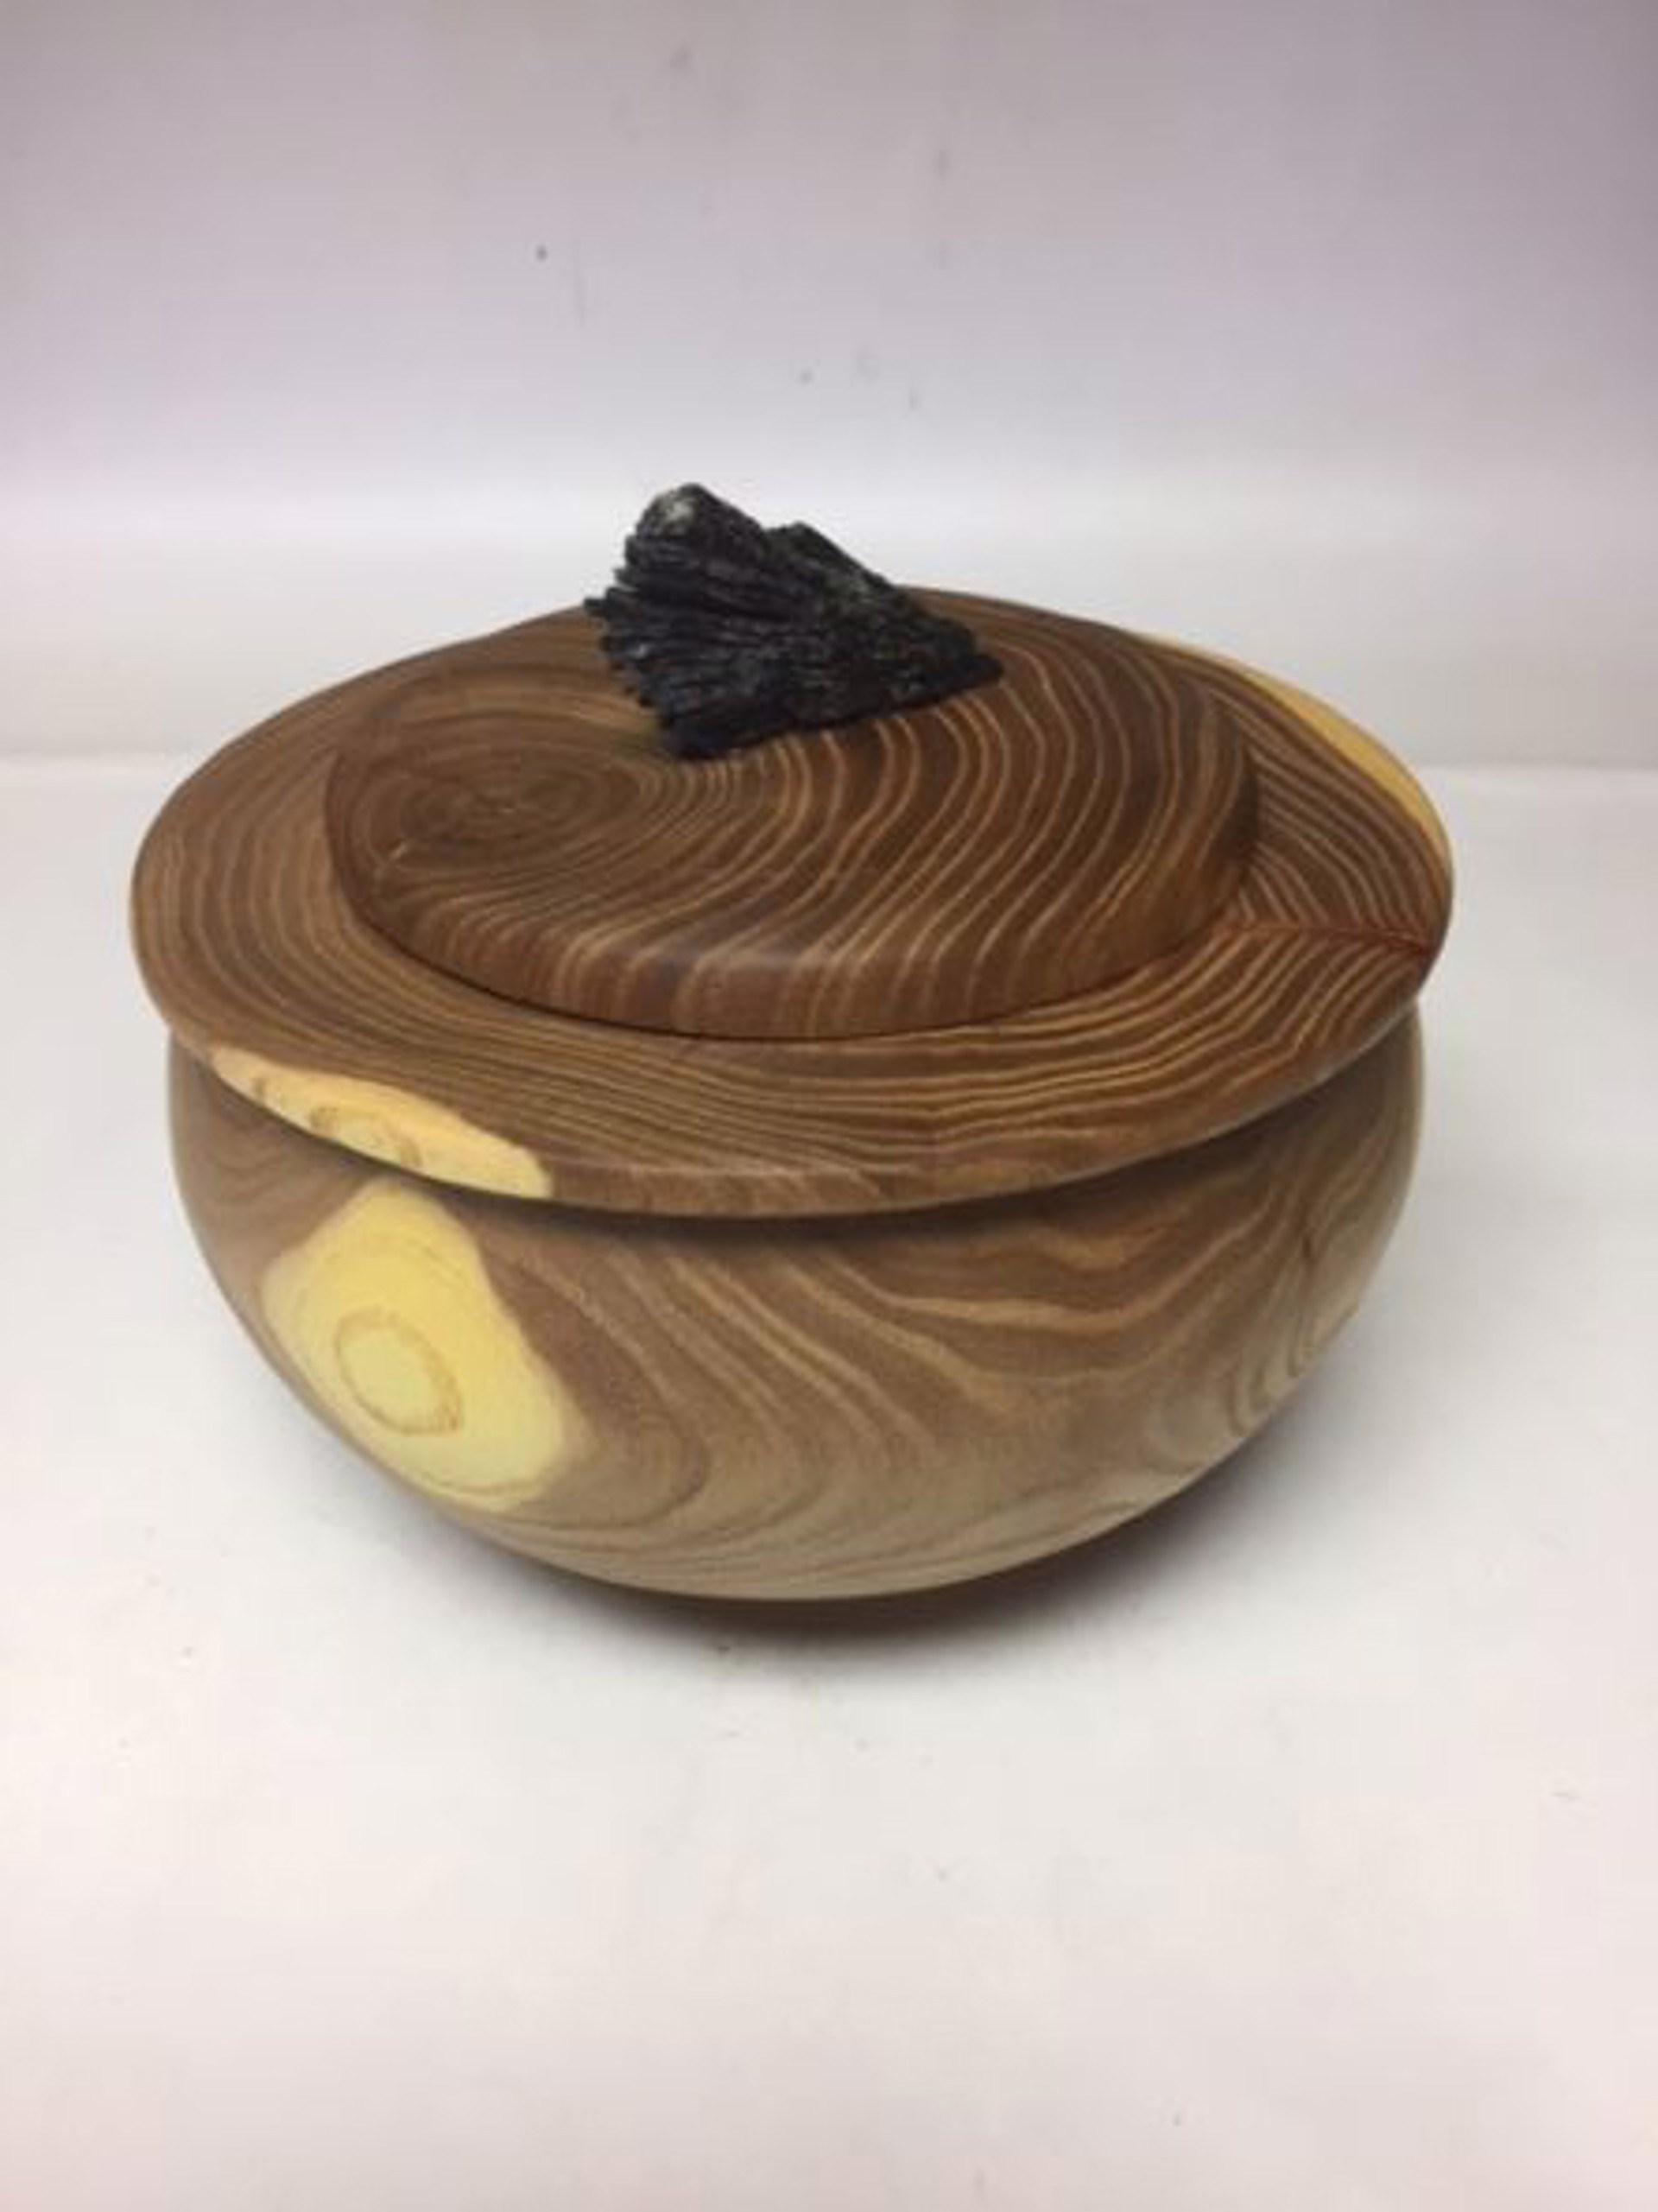 Turned Wood Jar W/Lid 20-28 by Rick Squires